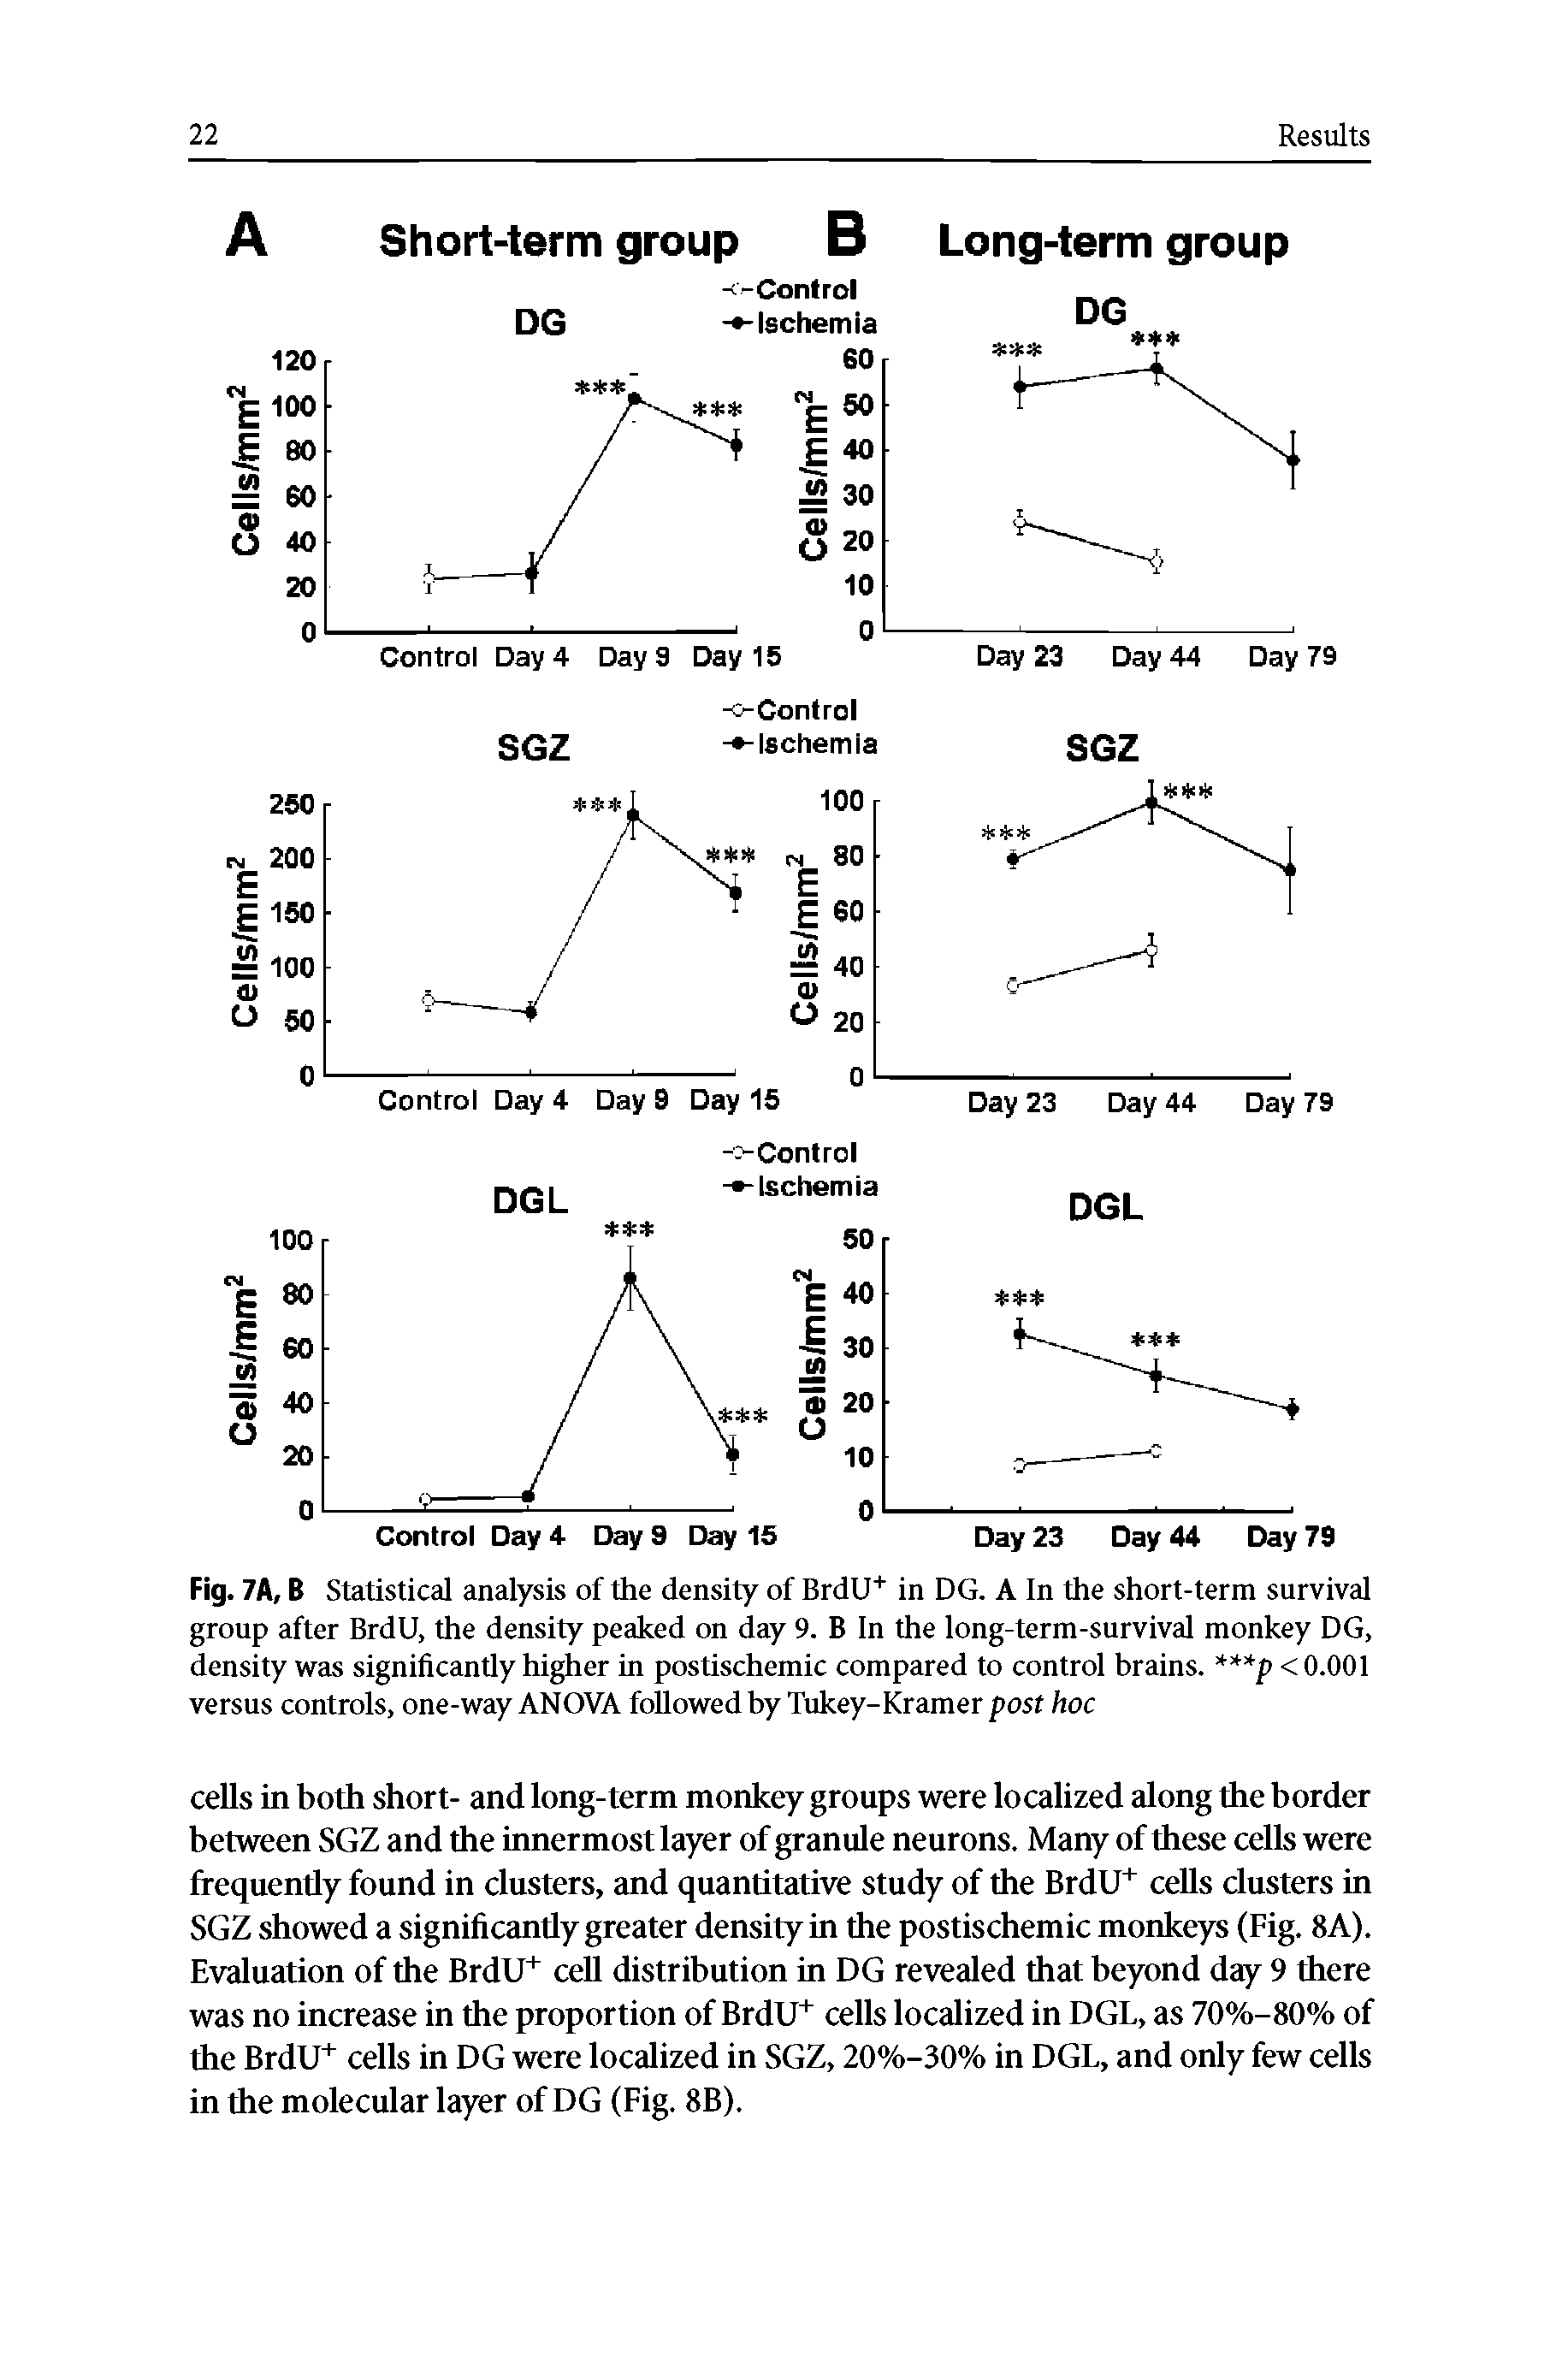 Fig. 7A, B Statistical analysis of the density of BrdU+ in DG. A In the short-term survival group after BrdU, the density peaked on day 9. B In the long-term-survival monkey DG, density was significantly higher in postischemic compared to control brains. p < 0.001 versus controls, one-way ANOVA followed by Tukey-Kramer post hoc...